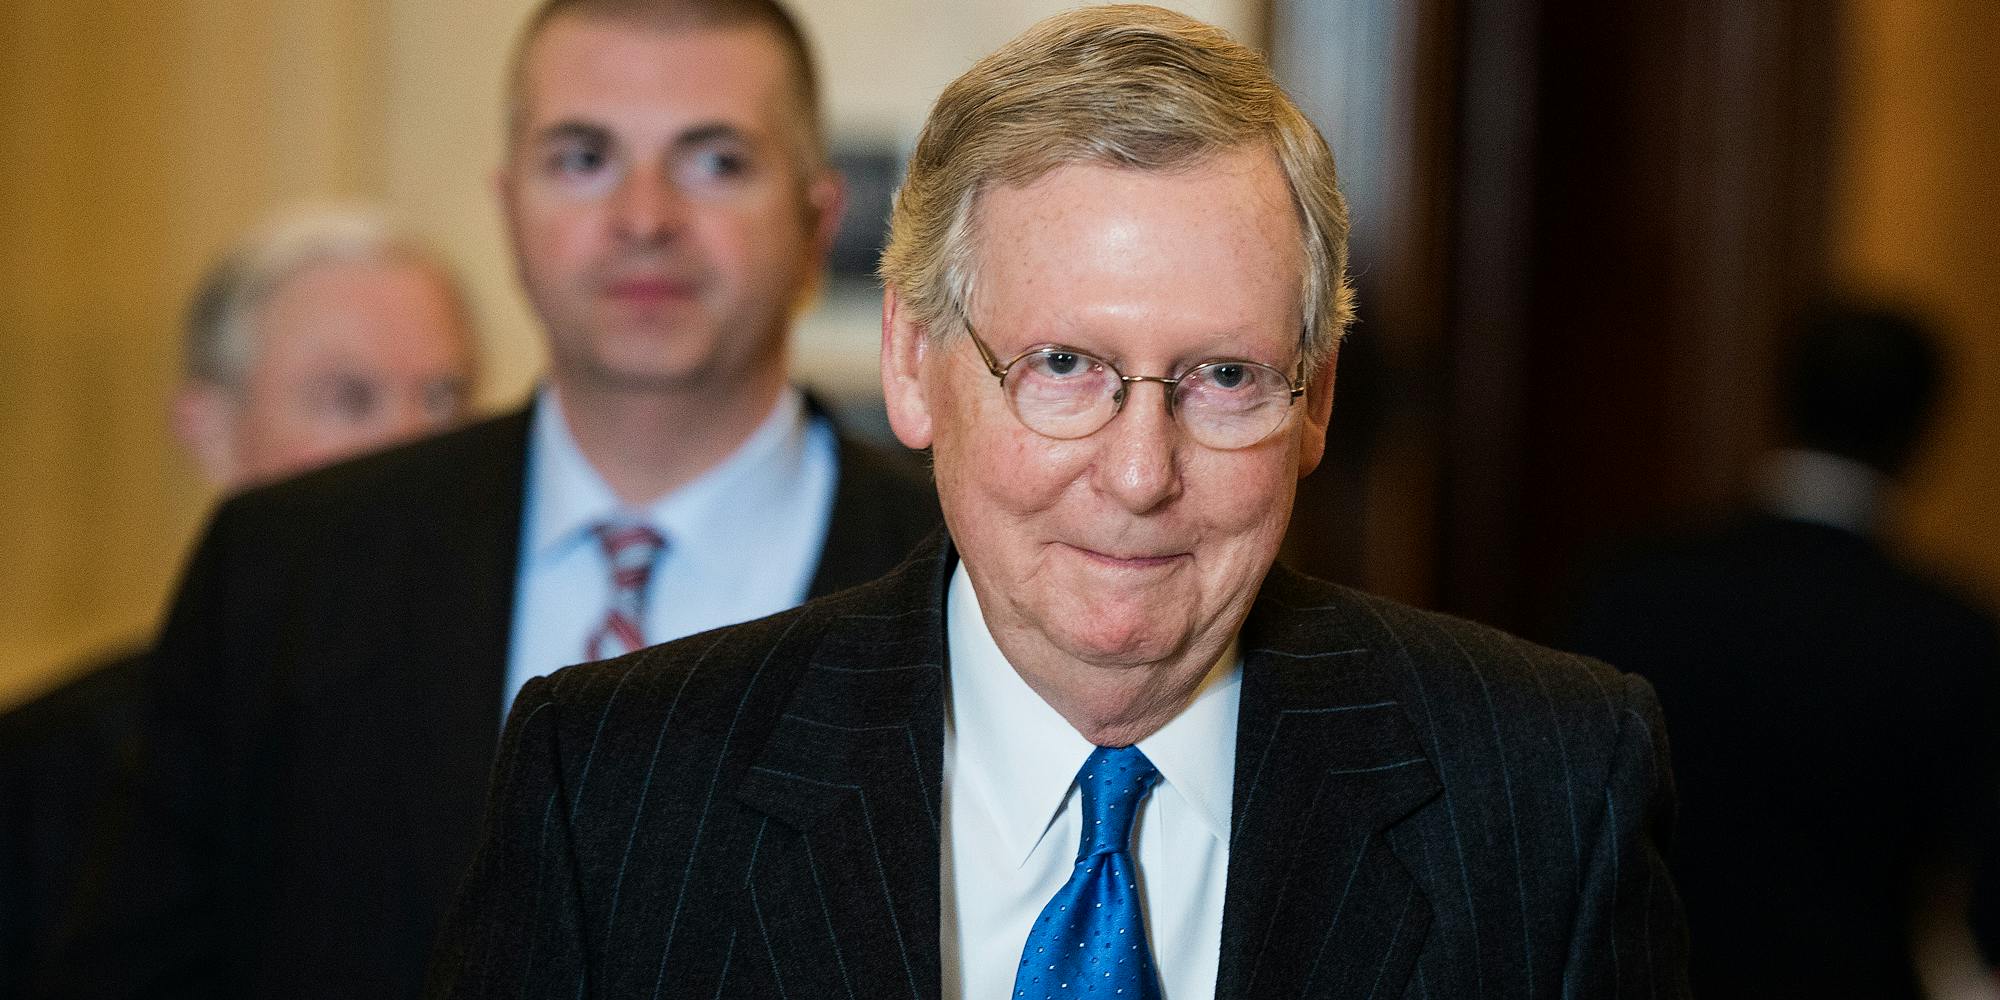 The Senate's Republican leader wants to legalize and fund industrial hemp